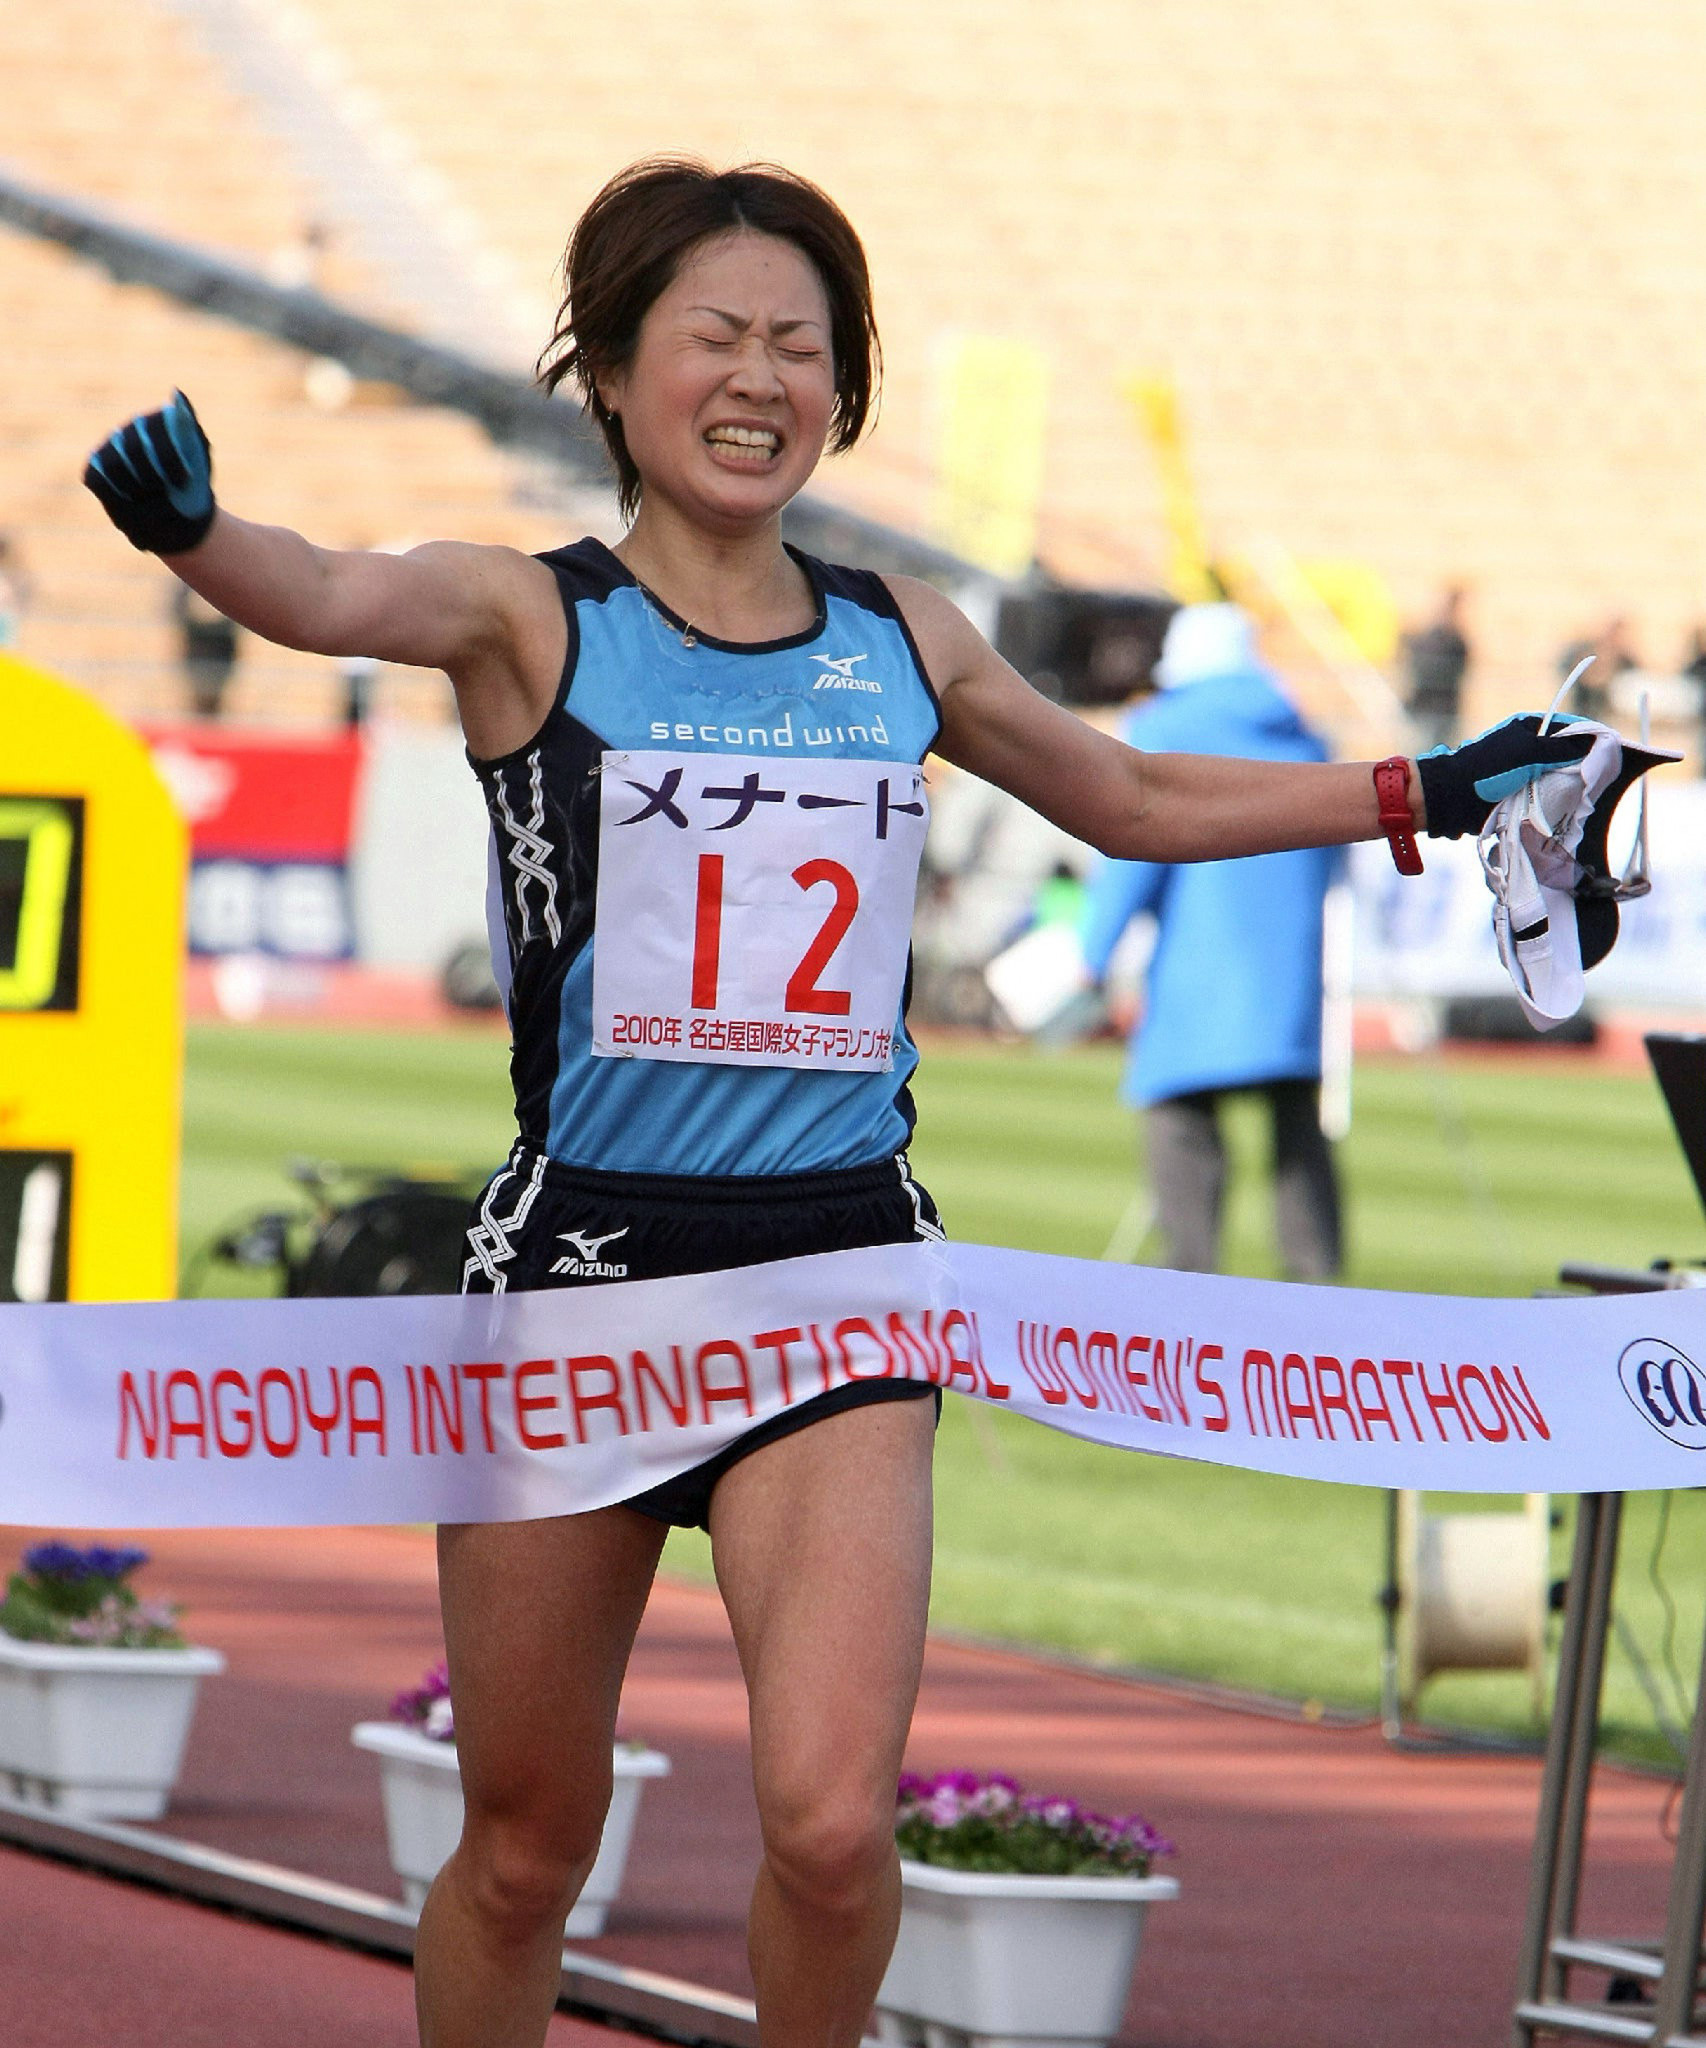 The Nagoya Women's Marathon has a long history stretching back to 1980 ©Getty Images